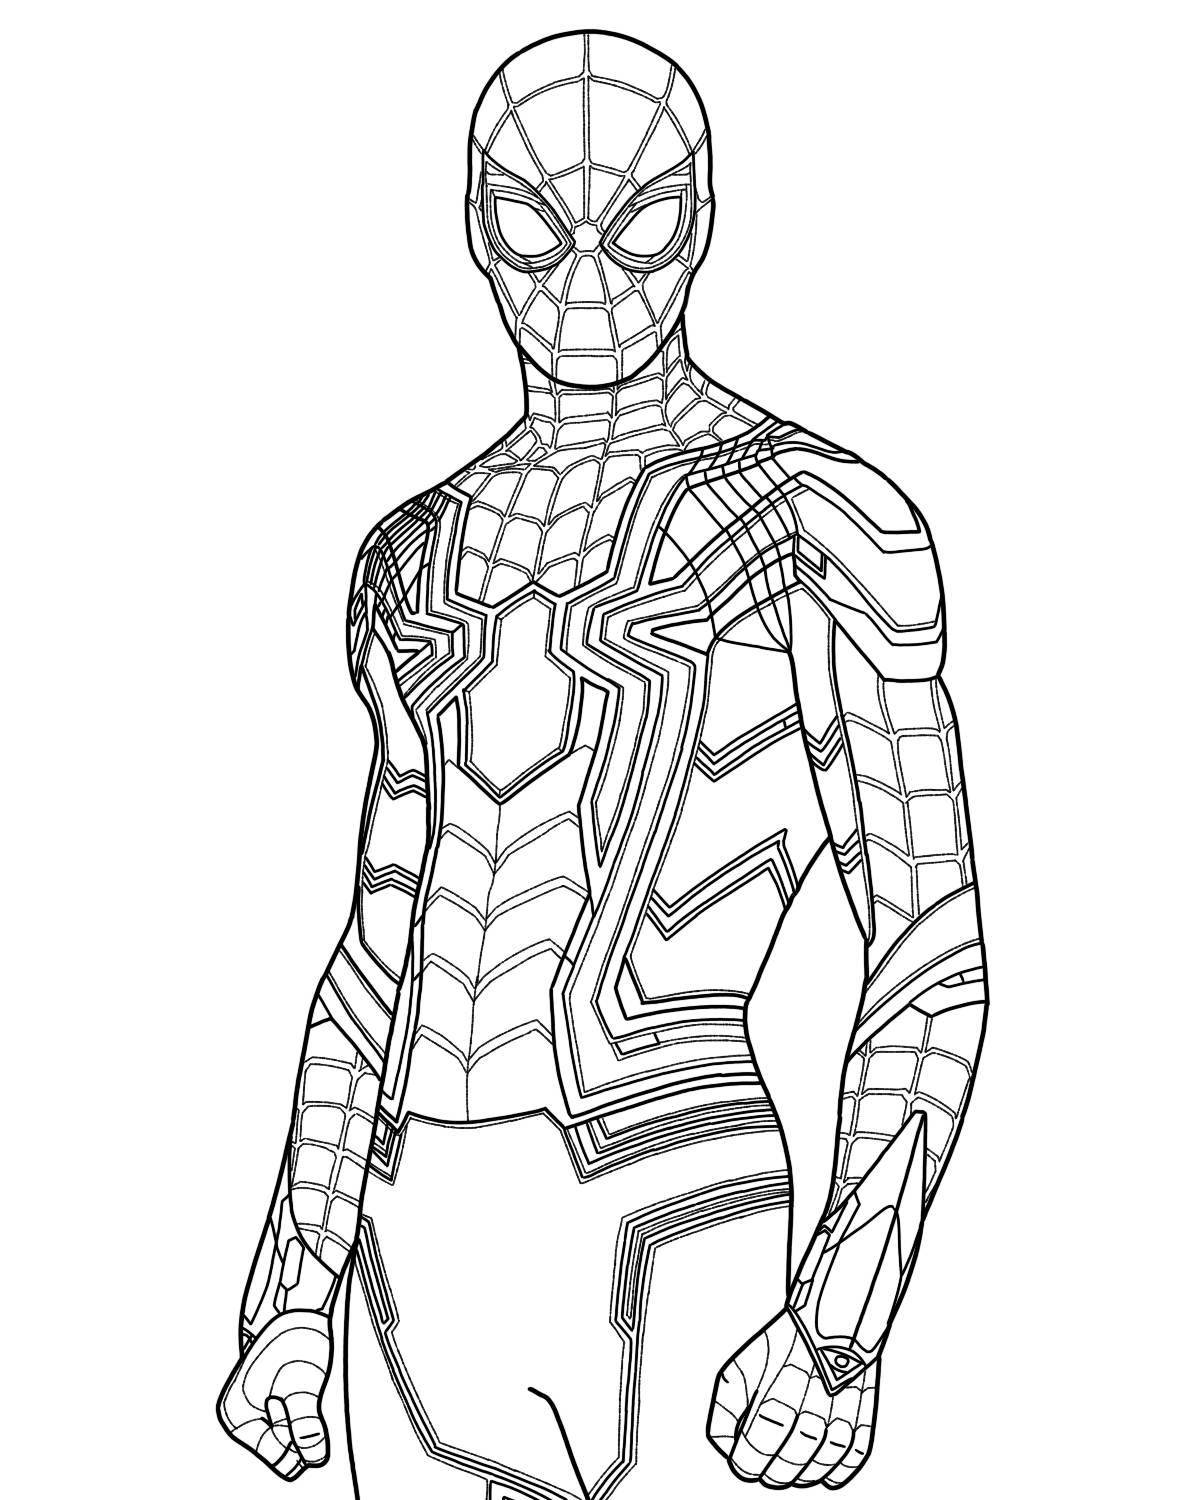 Joyful spiderman and iron man coloring pages for kids